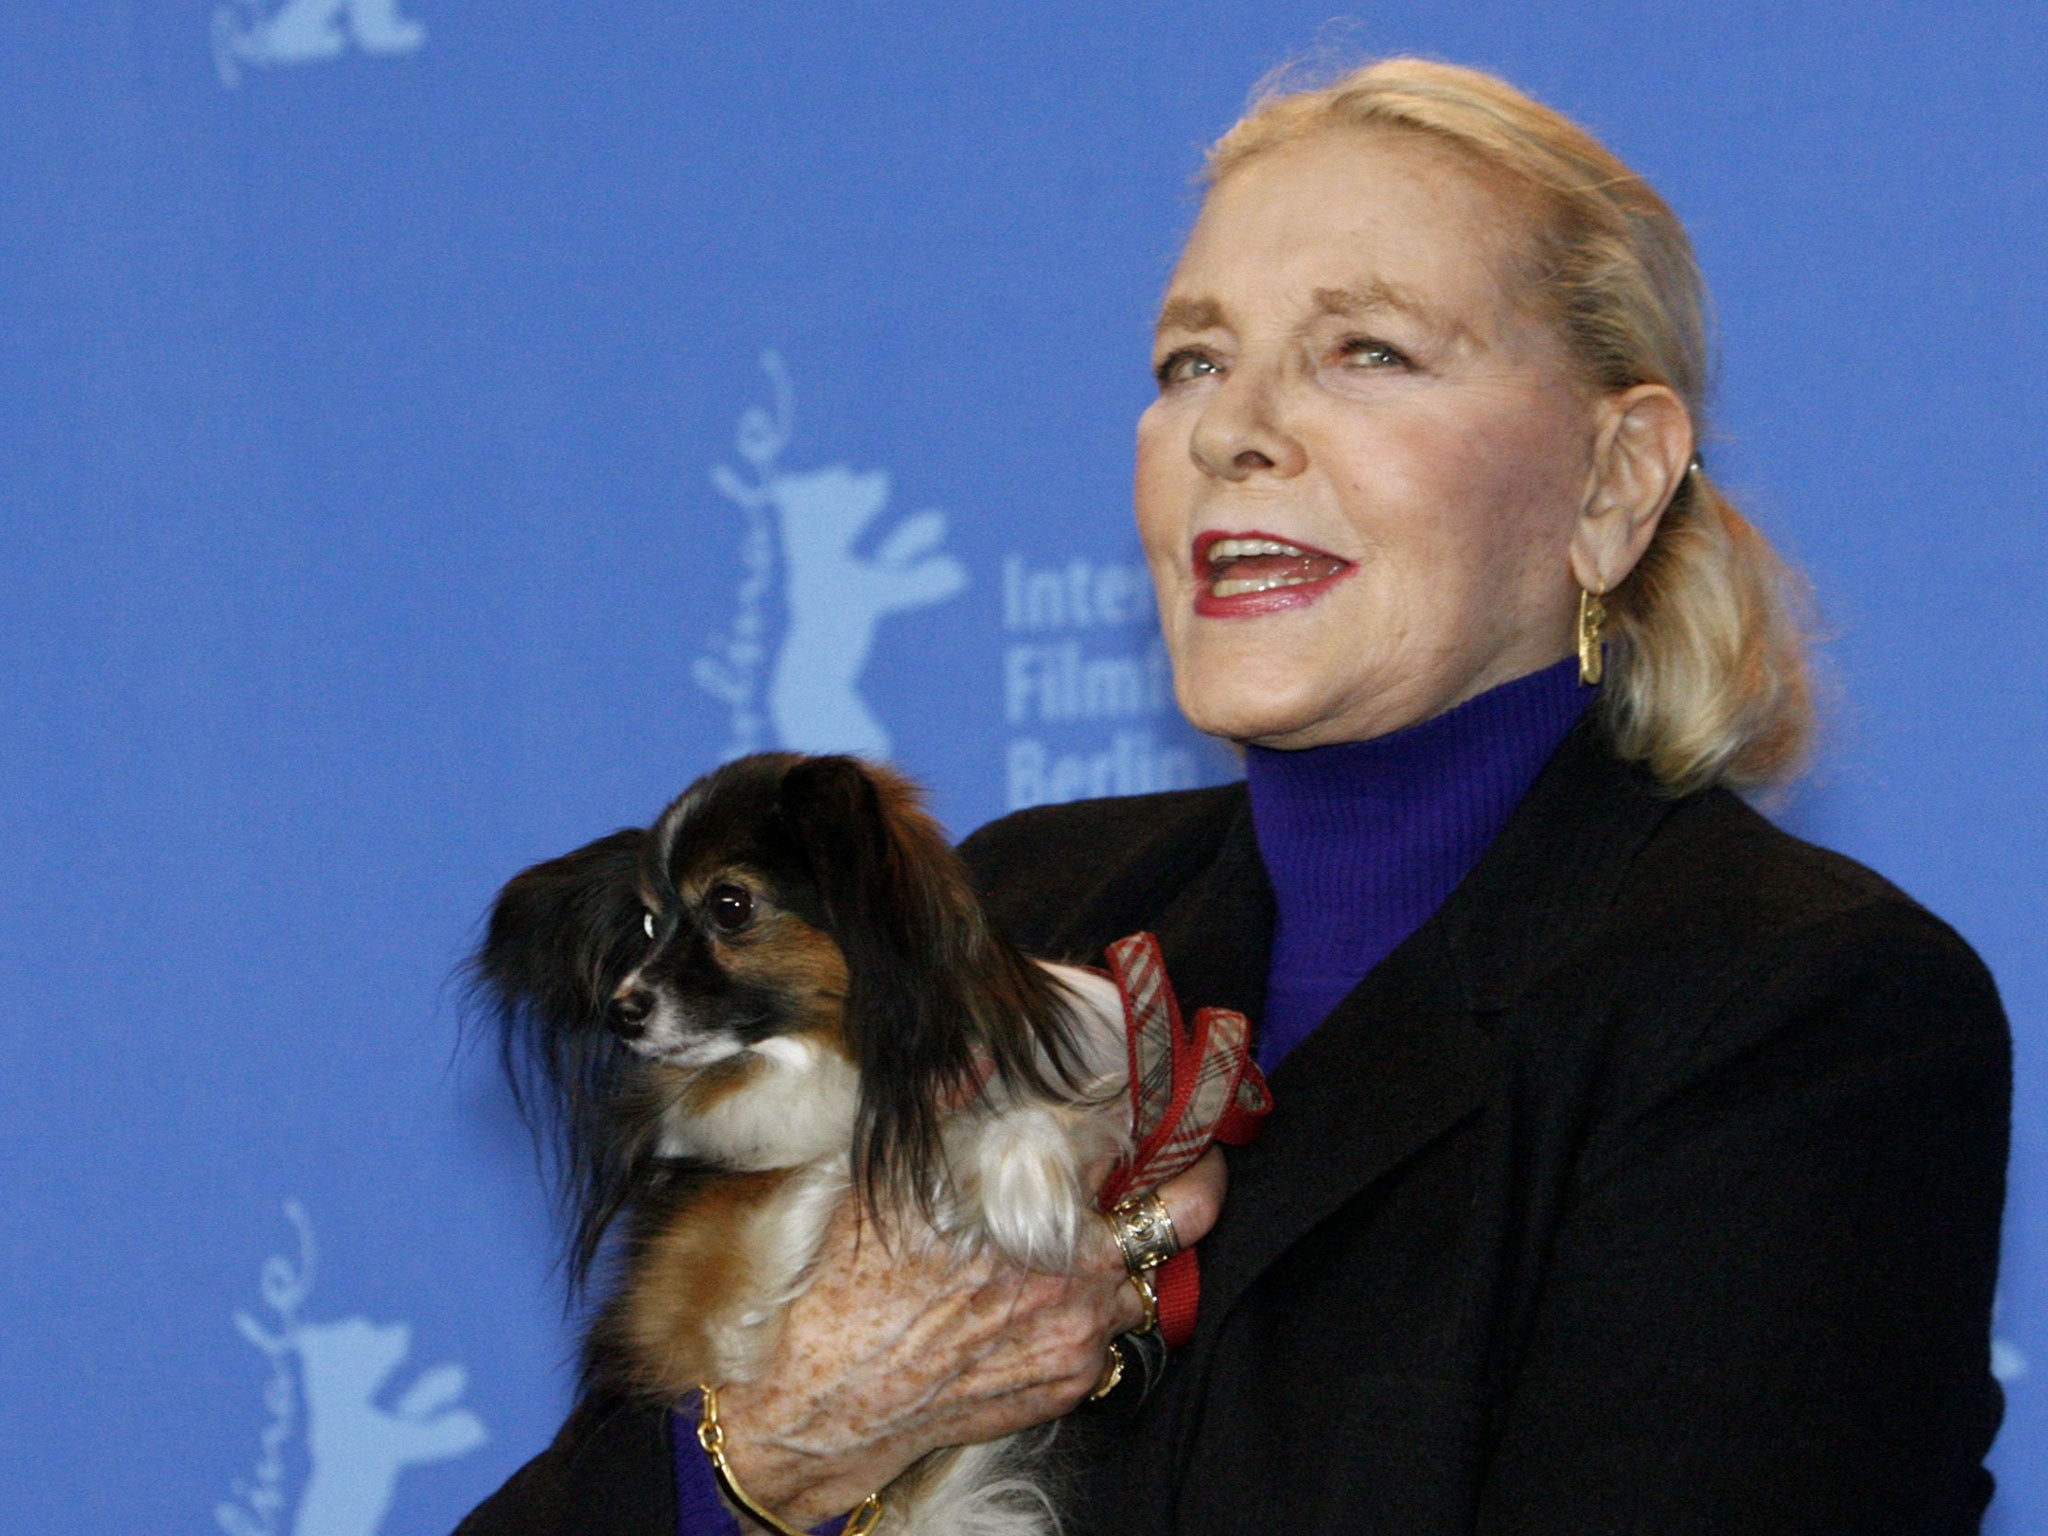 Hollywood actress, Lauren Bacall, pictured in 2007, has died at the age of 89